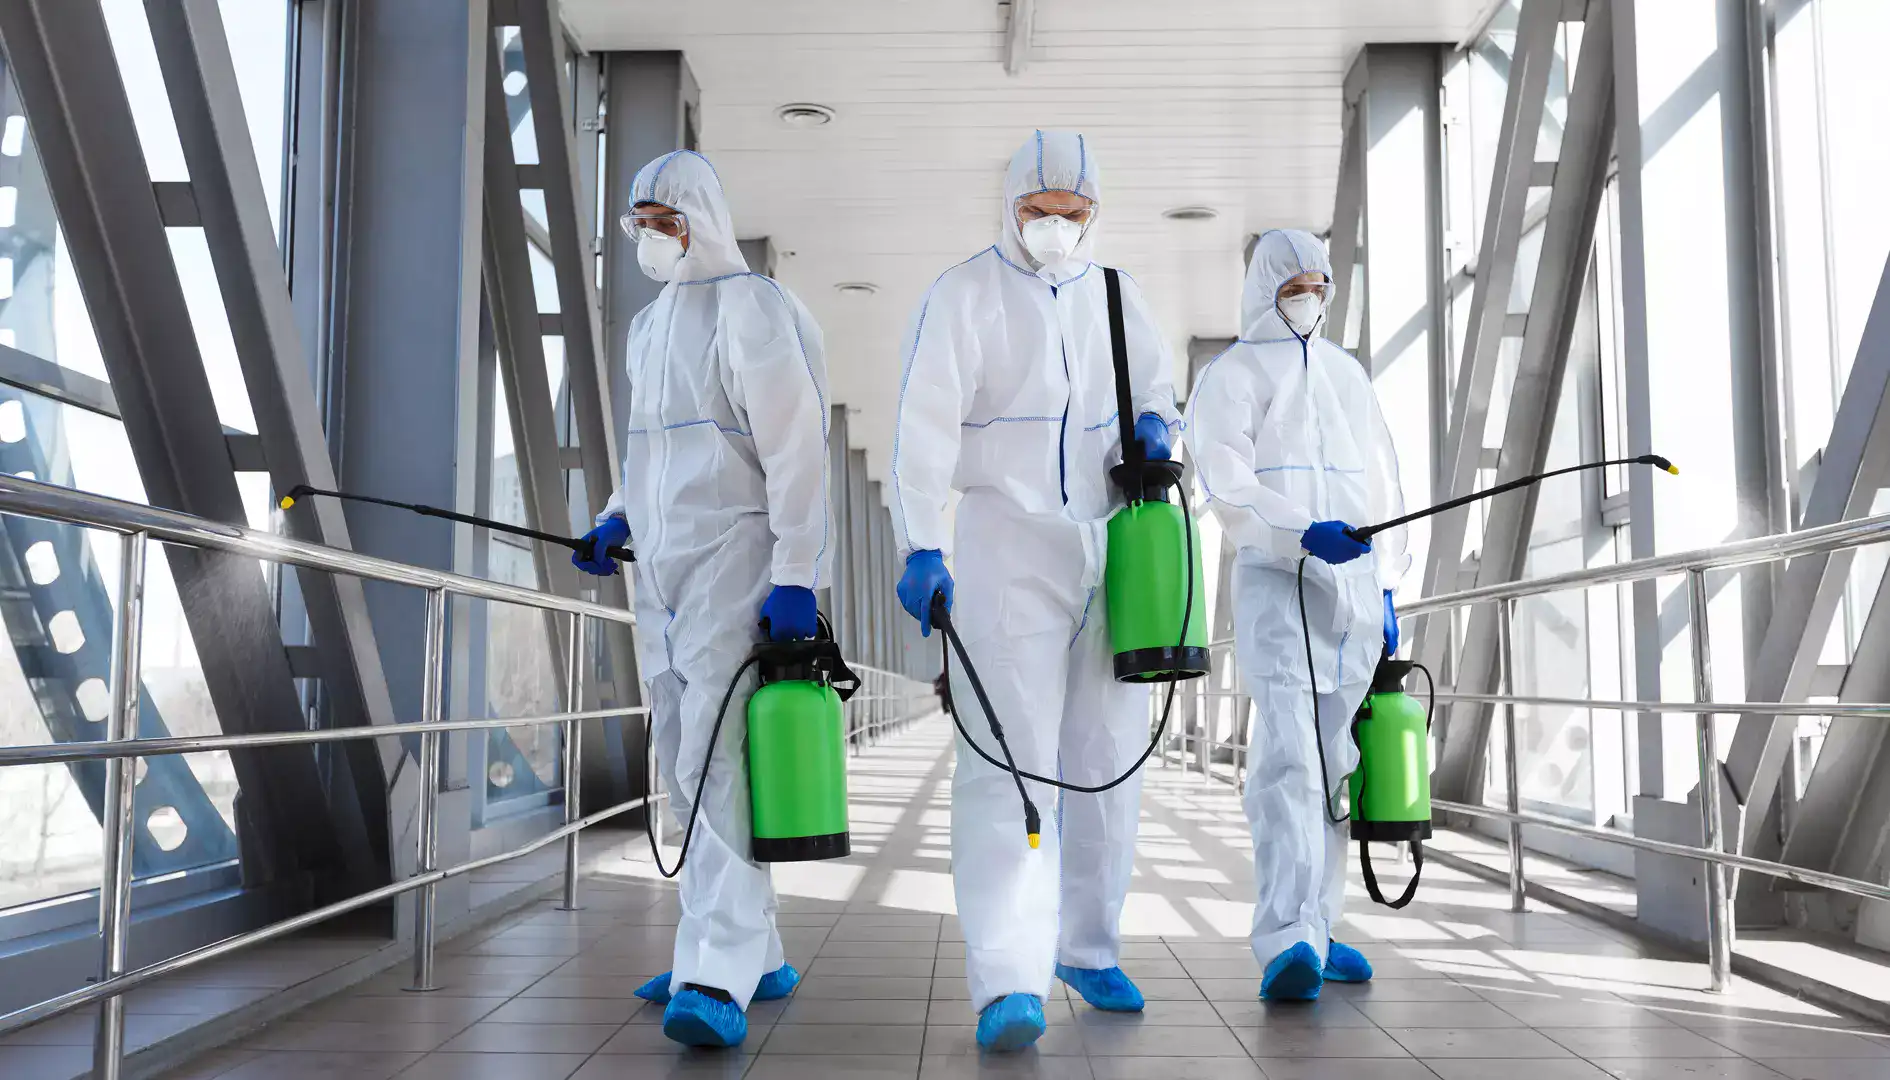 three workers in protective suits carry out disinfection